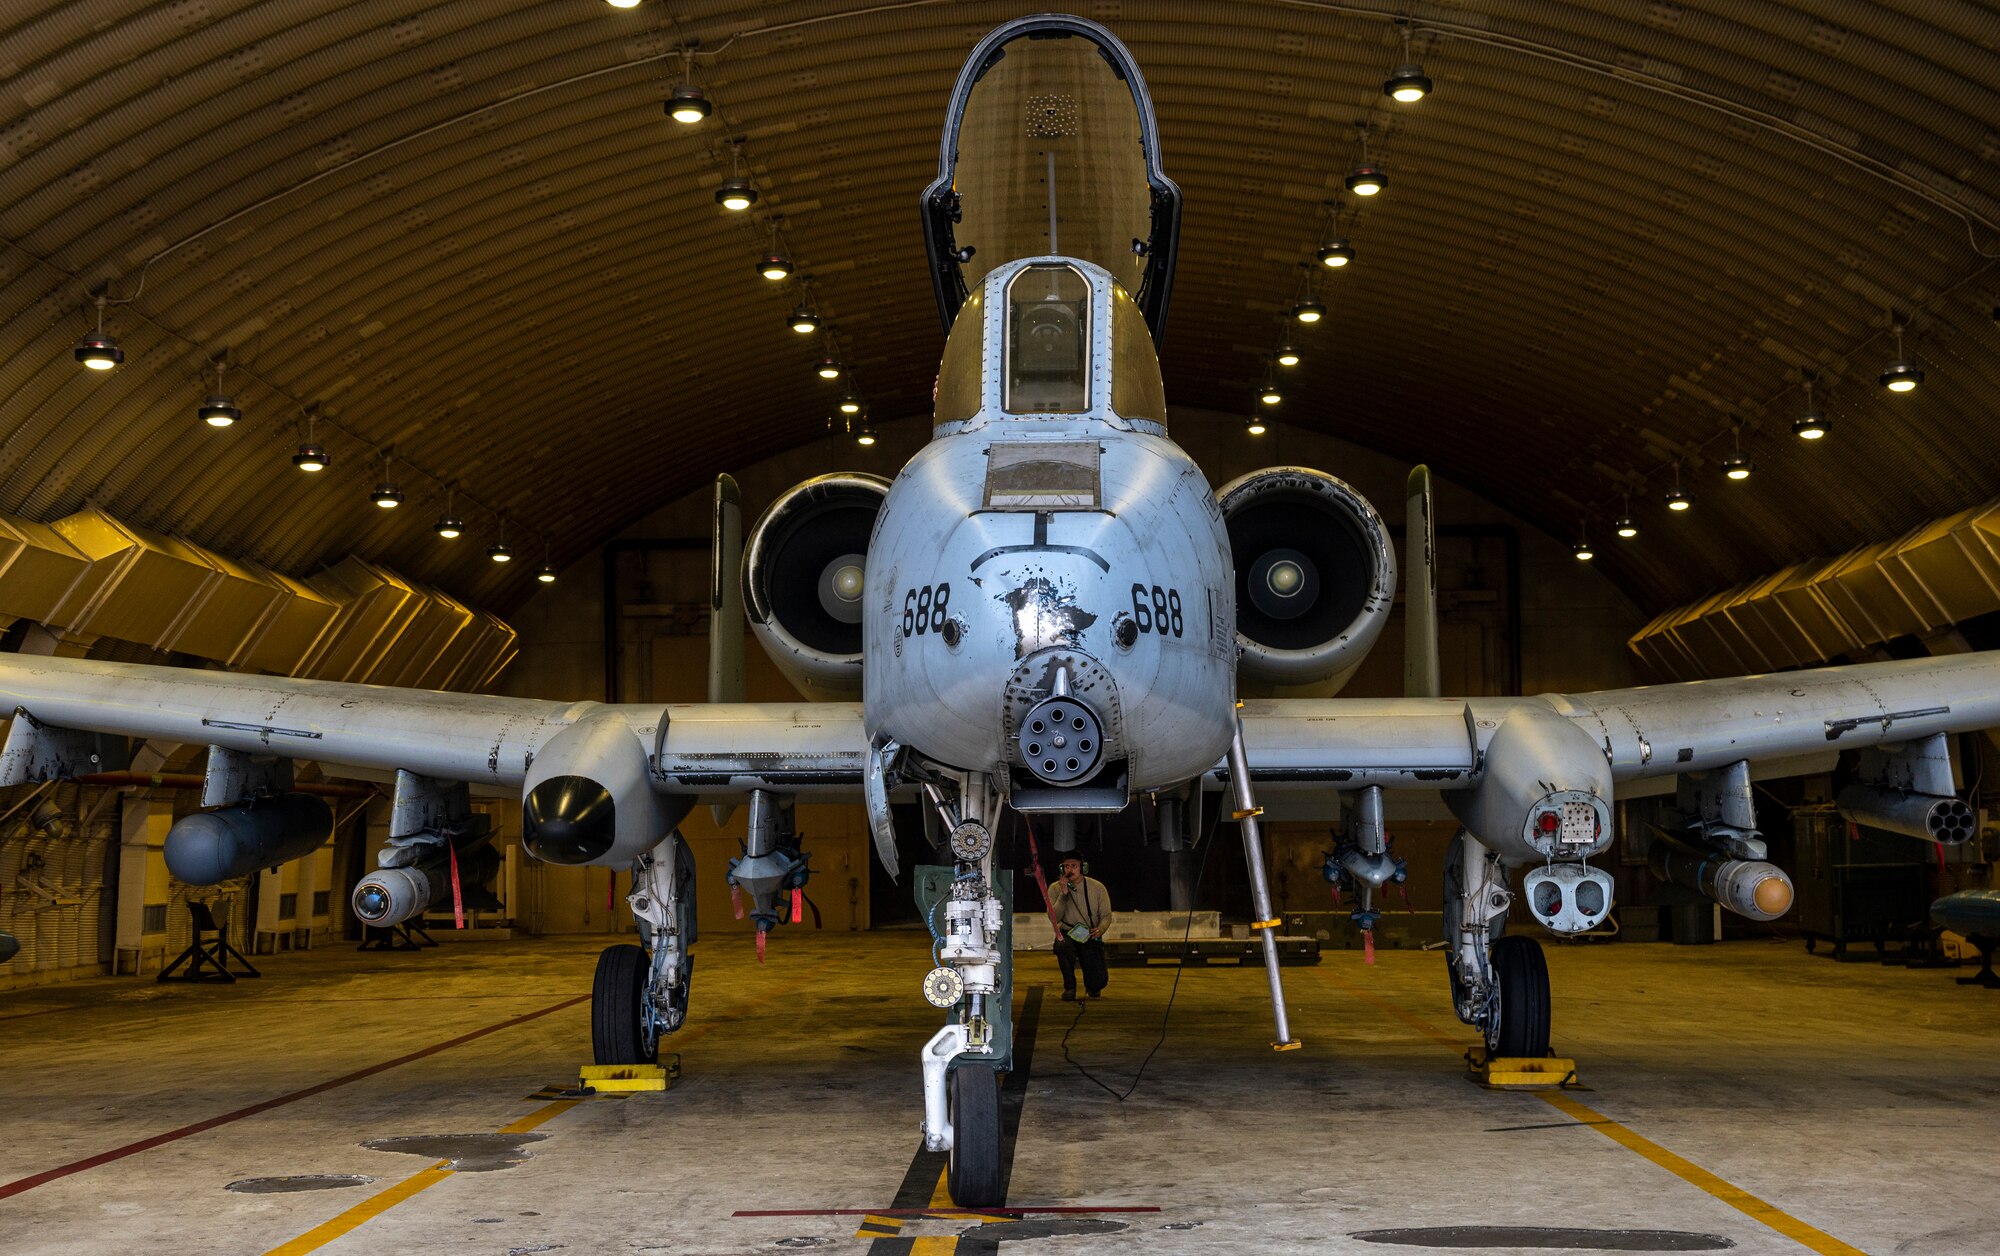 U.S. Air Force Airman 1st Class Timothy Gisclair, 25th Fighter Generation Squadron crew chief, performs pre-flight checks on an A-10C Thunderbolt II during Buddy Squadron 23-2 at Osan Air Base, Republic of Korea, March 8, 2023.